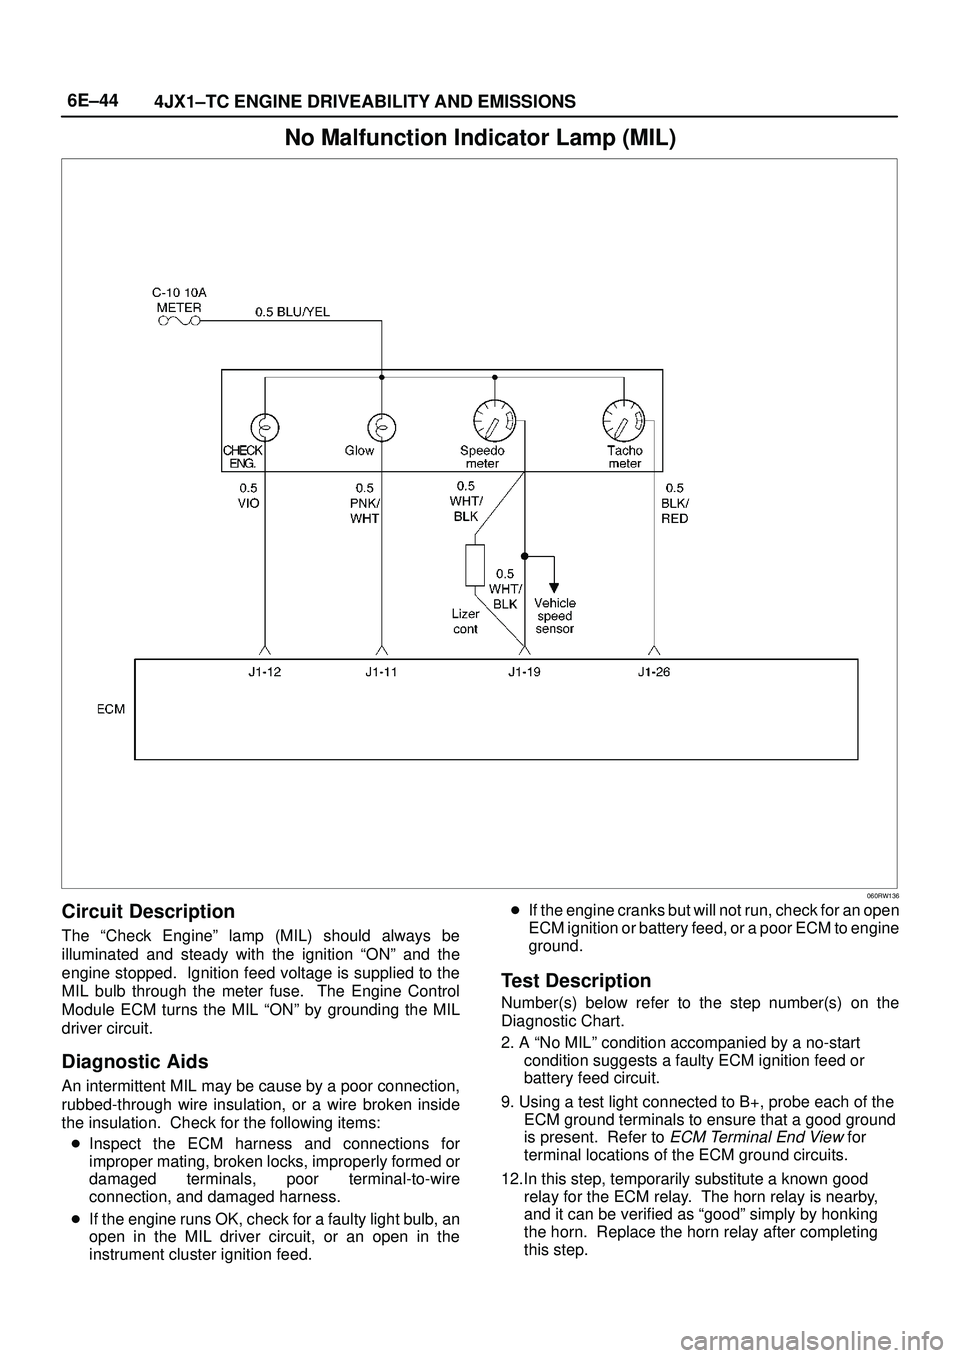 ISUZU TROOPER 1998  Service Repair Manual 6E±44
4JX1±TC ENGINE DRIVEABILITY AND EMISSIONS
No Malfunction Indicator Lamp (MIL)
060RW136
Circuit Description
The ªCheck Engineº lamp (MIL) should always be
illuminated and steady with the igni